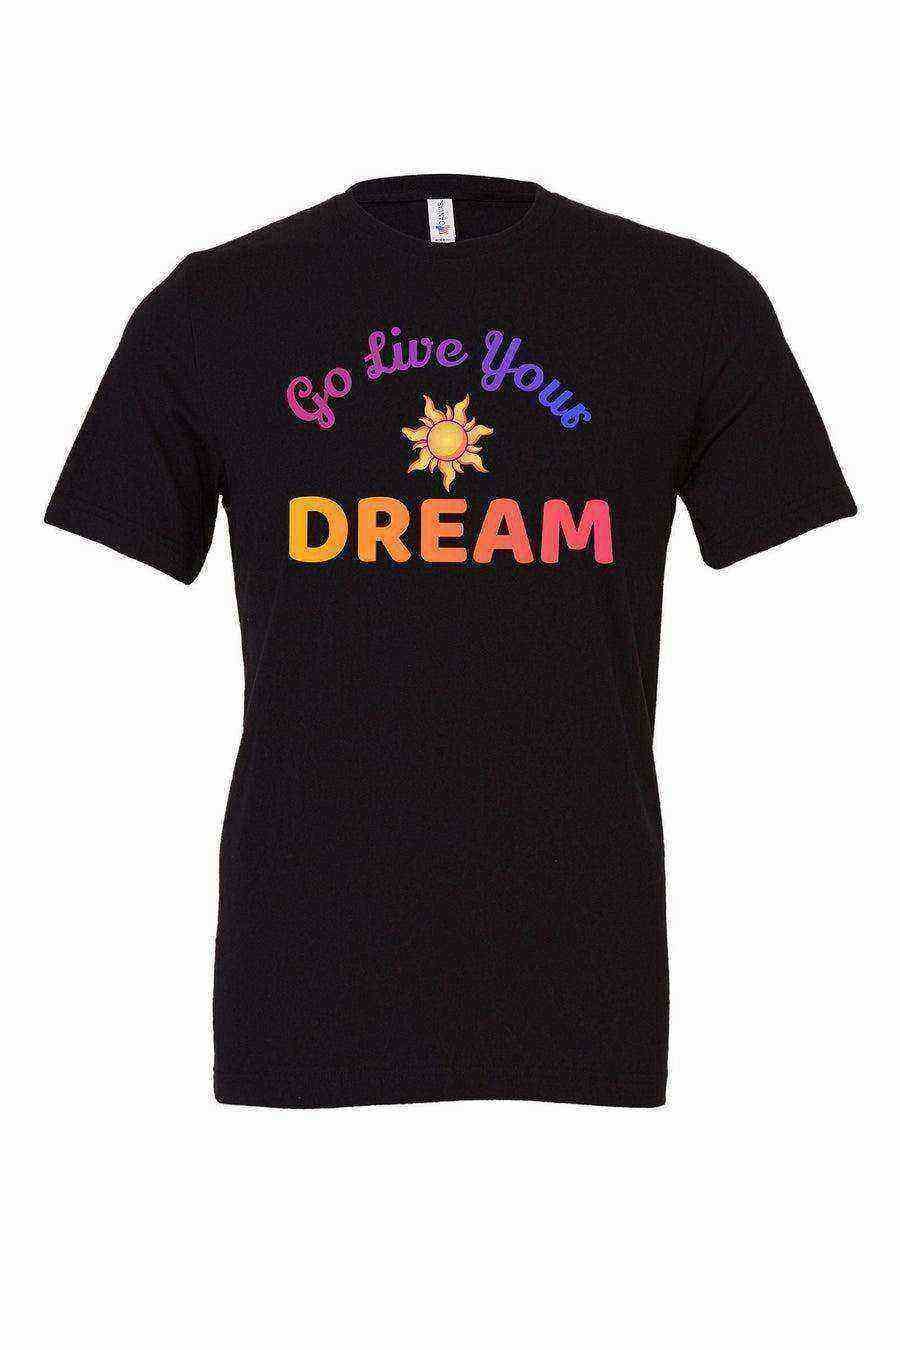 Youth | Go Live Your Dream Shirt | Rapunzel Shirt | Tangled Shirt - Dylan's Tees